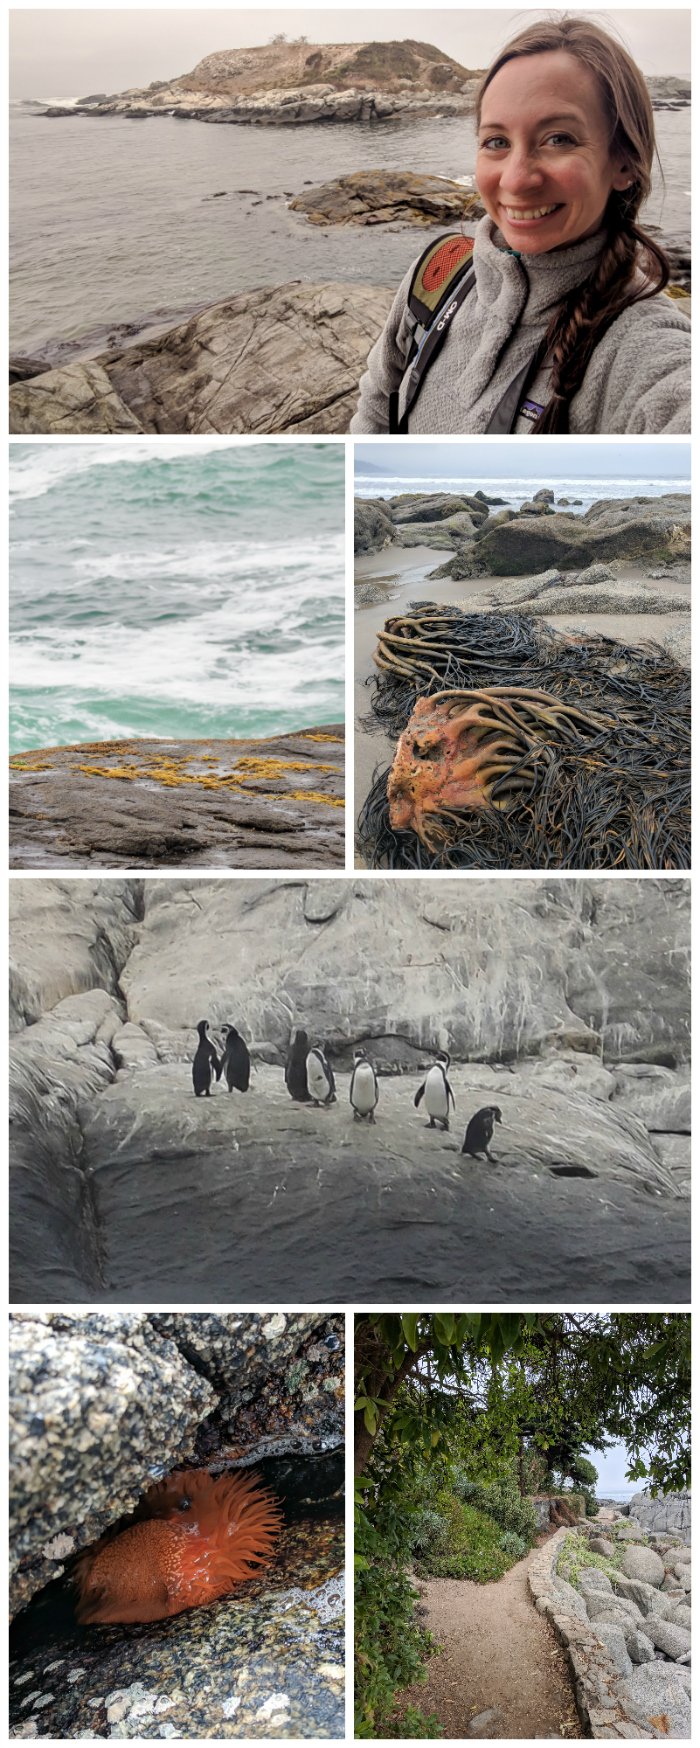 How to Spend One Week in Chile and Cover All the Bases | Spending the day with penguins on the Isla de Cachagua #chile #valparaiso #whattodoinchile #weekinchile #penguins #cachagua #beach